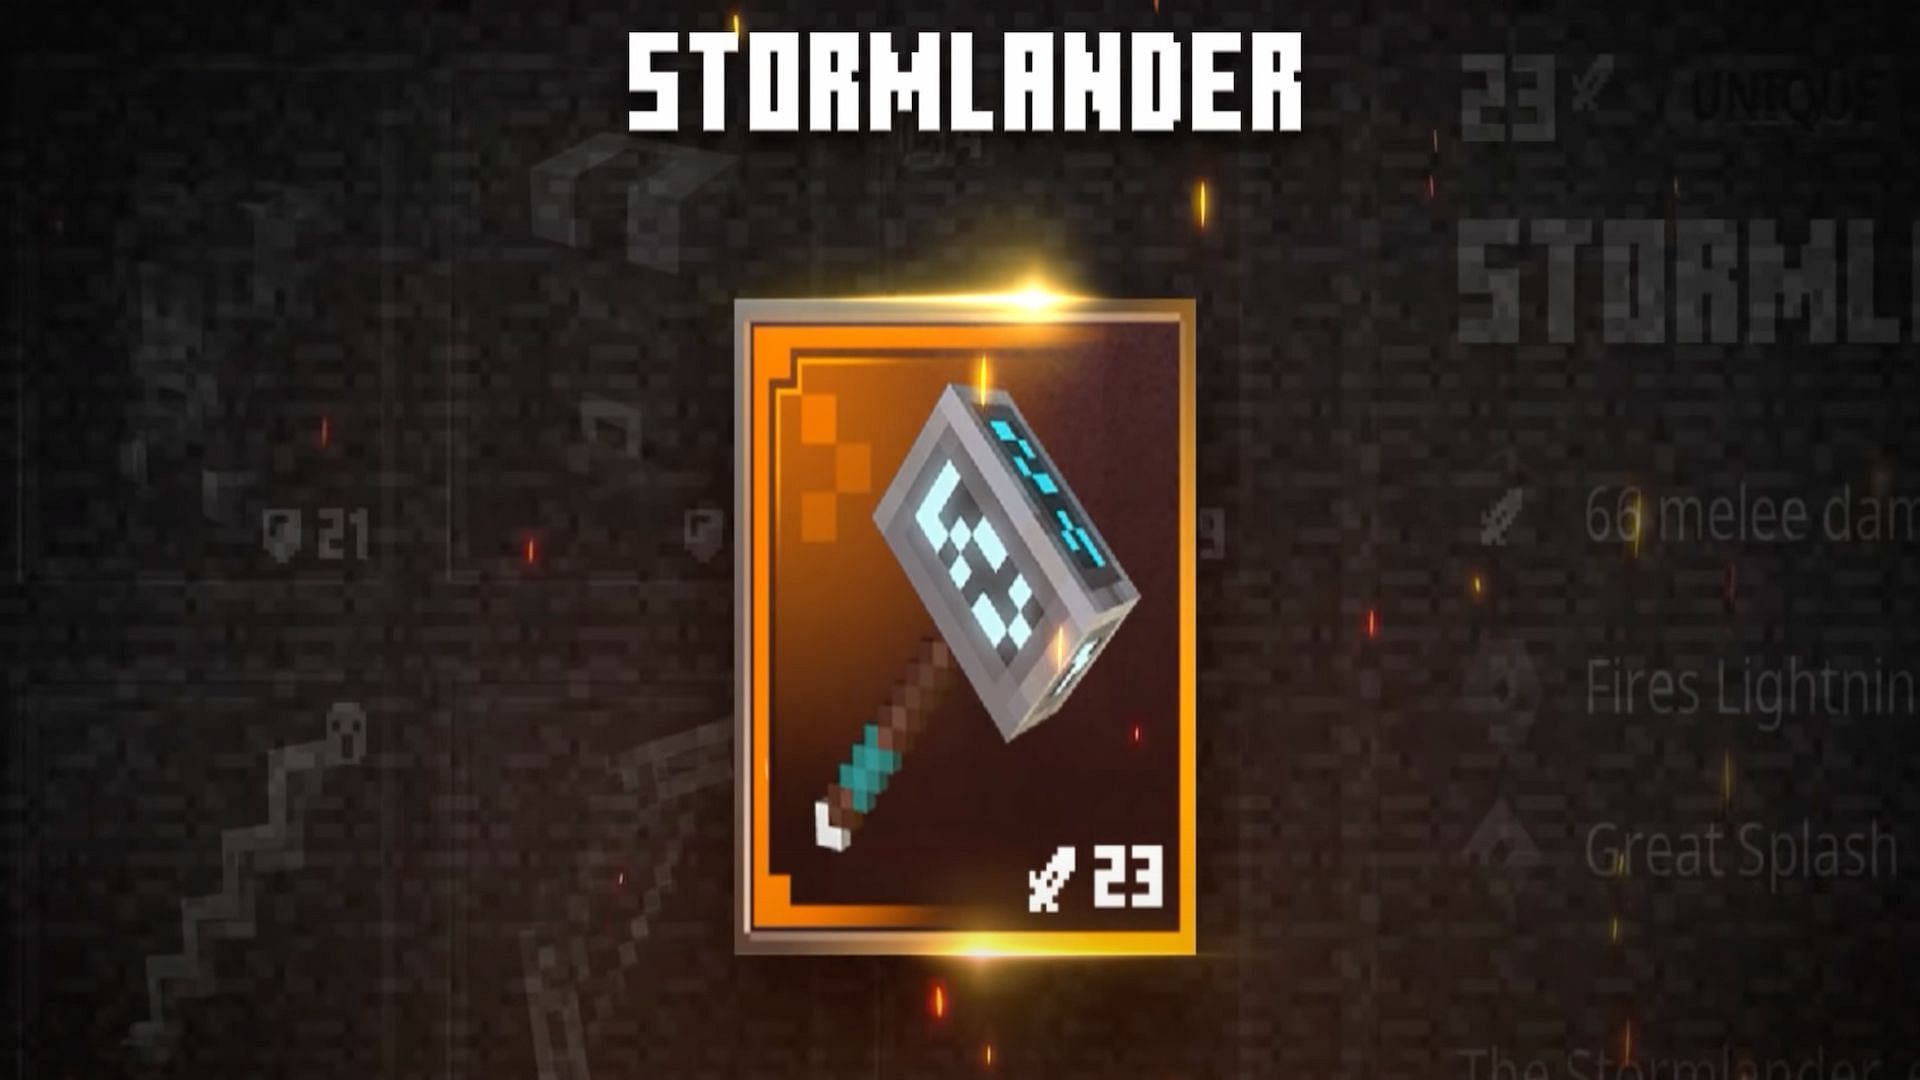 Players can pick up the powerful hammer, Stormlander, to deal massive damage to their enemies (Image via Legacy Gaming/YouTube)